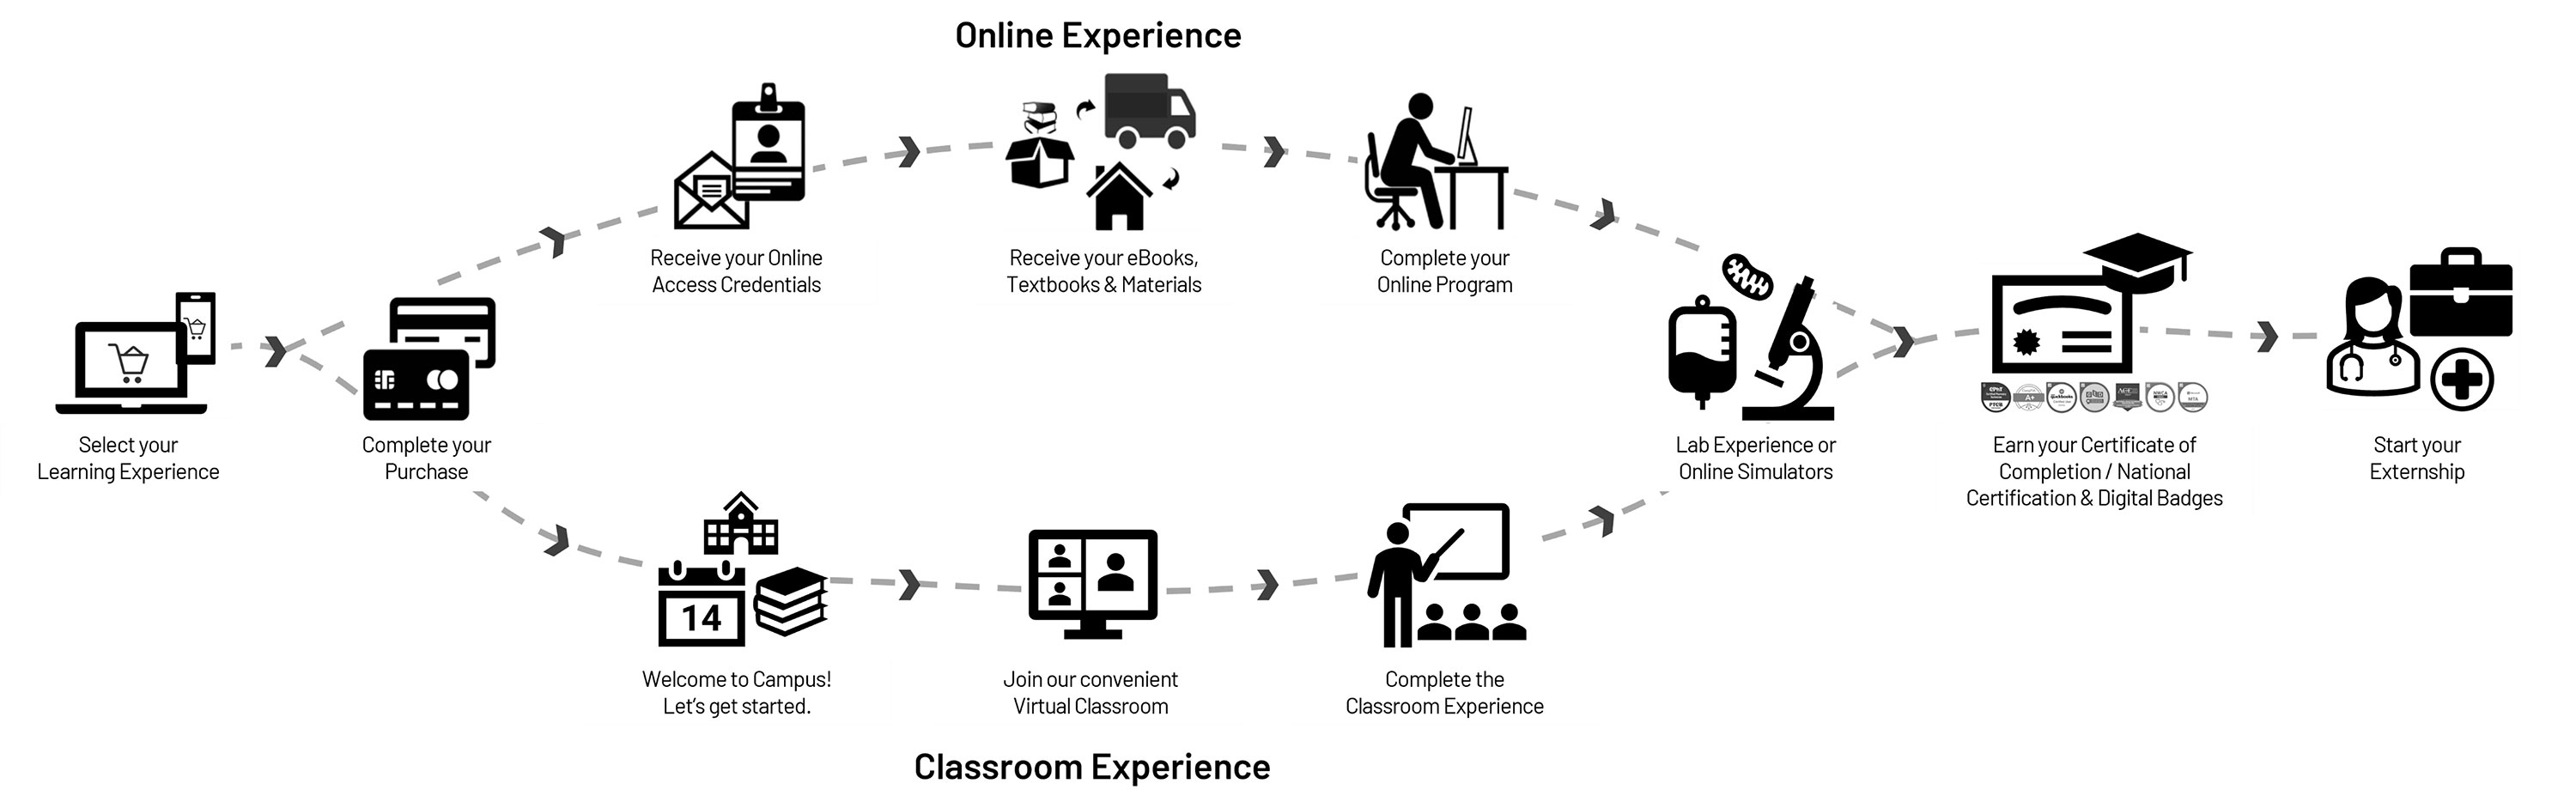 Online or Classroom Experiences